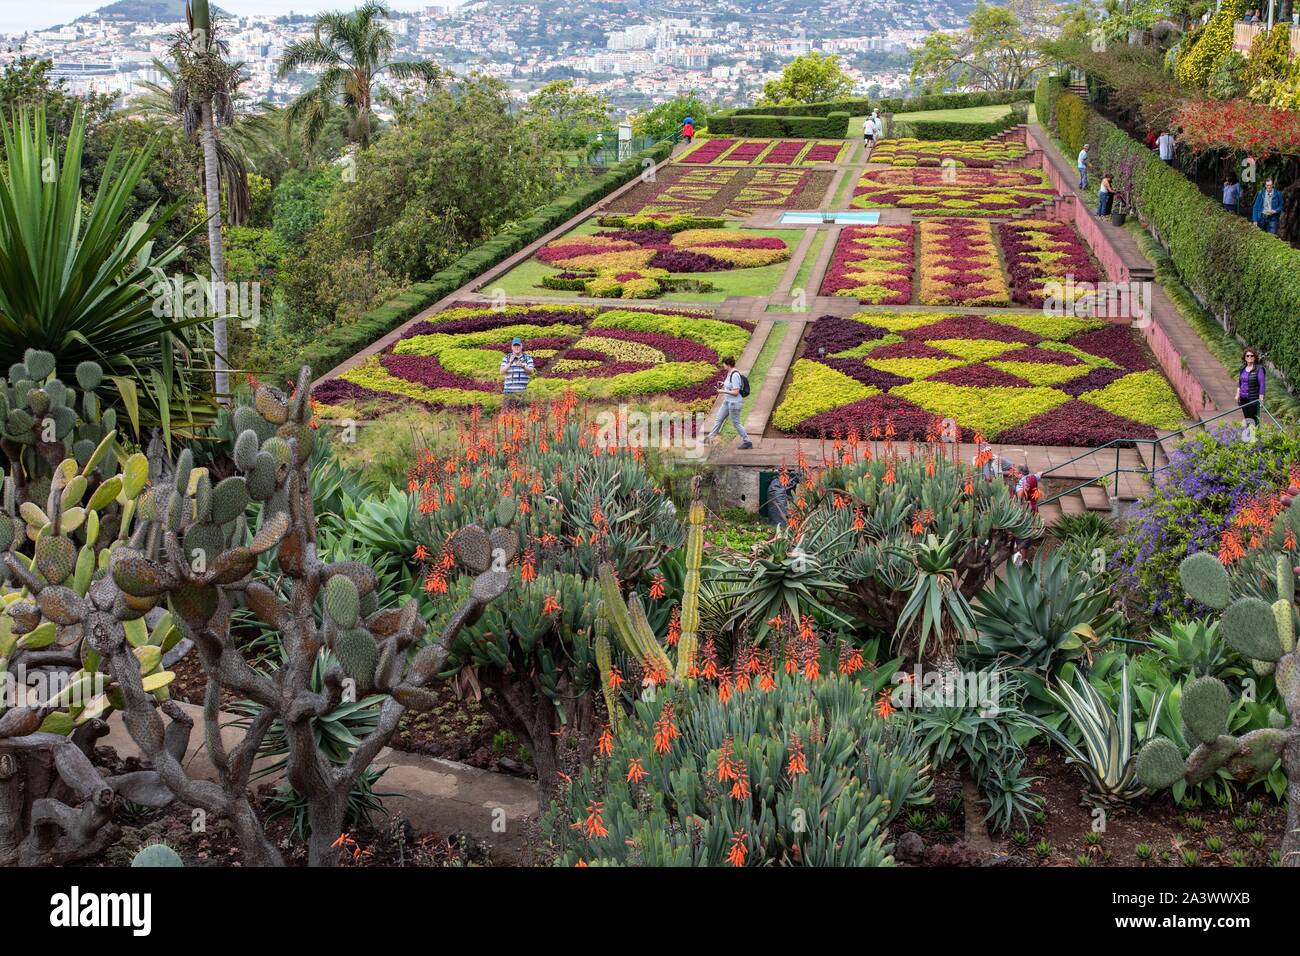 FLOWERBED, GEOMETRIC FORMS, BOTANICAL GARDEN OF MADEIRA, FUNCHAL, ISLAND OF MADEIRA, PORTUGAL Stock Photo